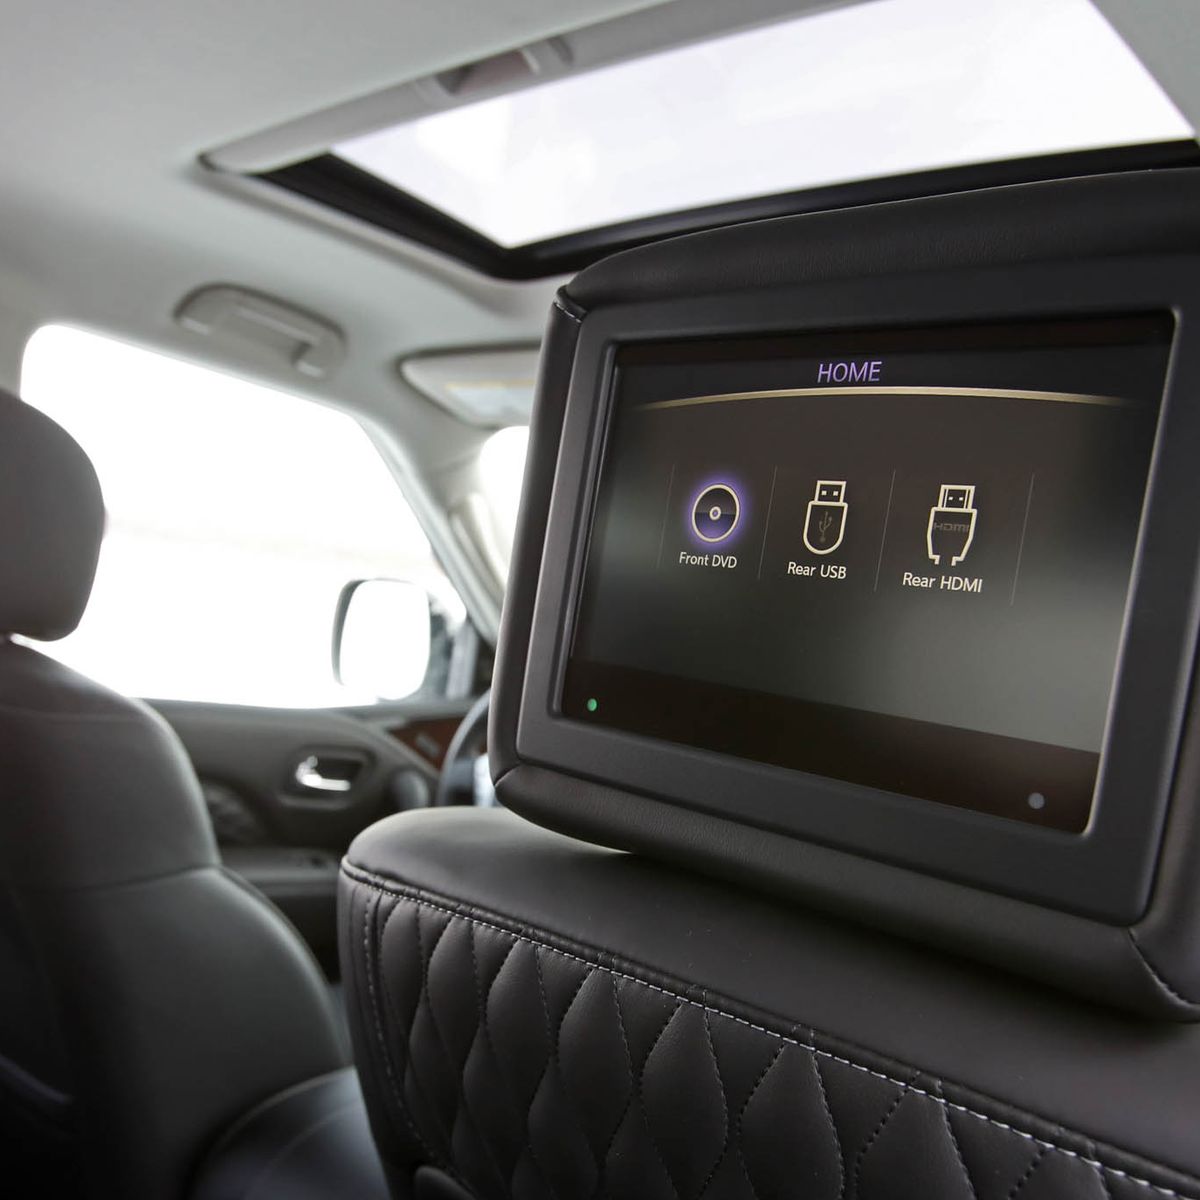 Rear-Seat Car Entertainment Systems – Comparing the Choices